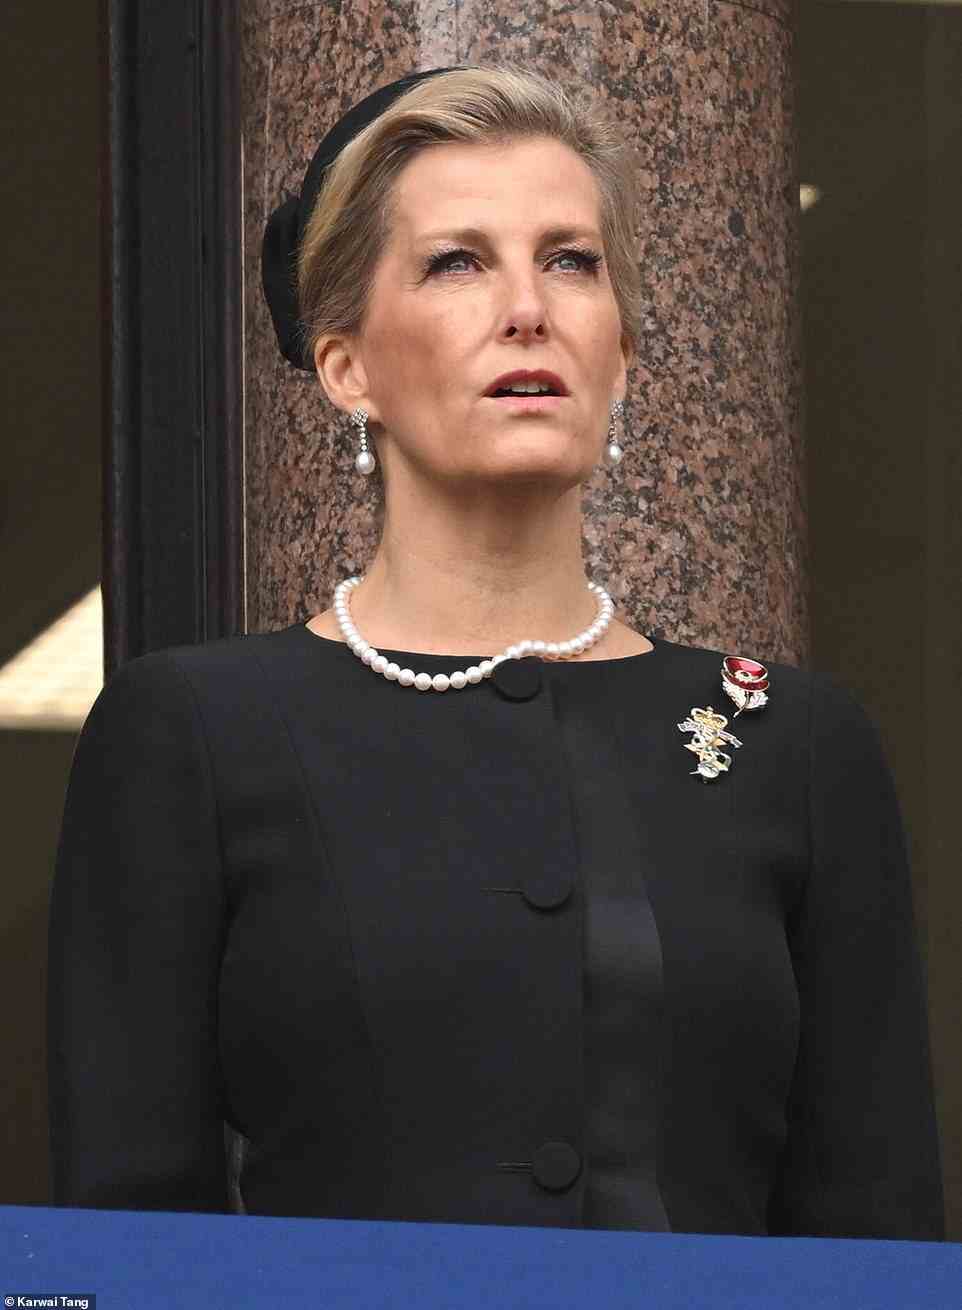 Sophie, Countess of Wessex and wife of Prince Edward, attends the ceremony from the spouse's balcony alongside Kate and the Queen Consort